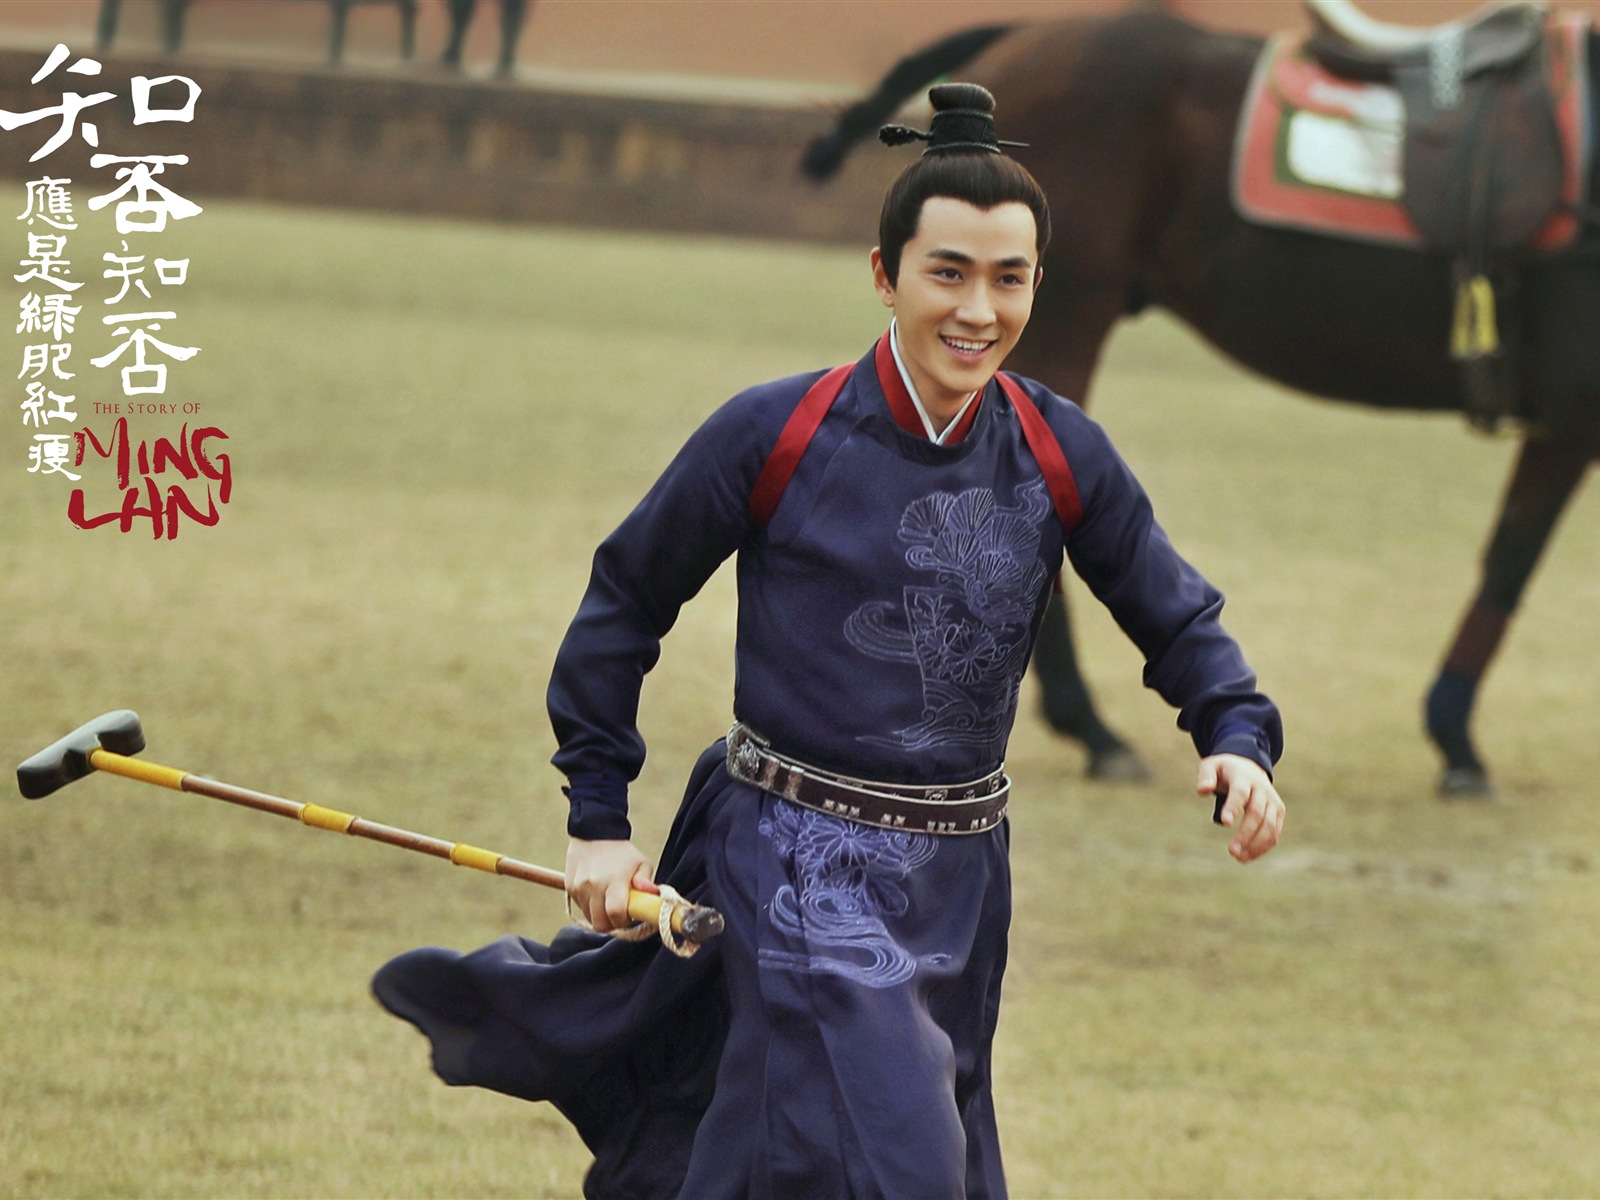 The Story Of MingLan, TV series HD wallpapers #25 - 1600x1200